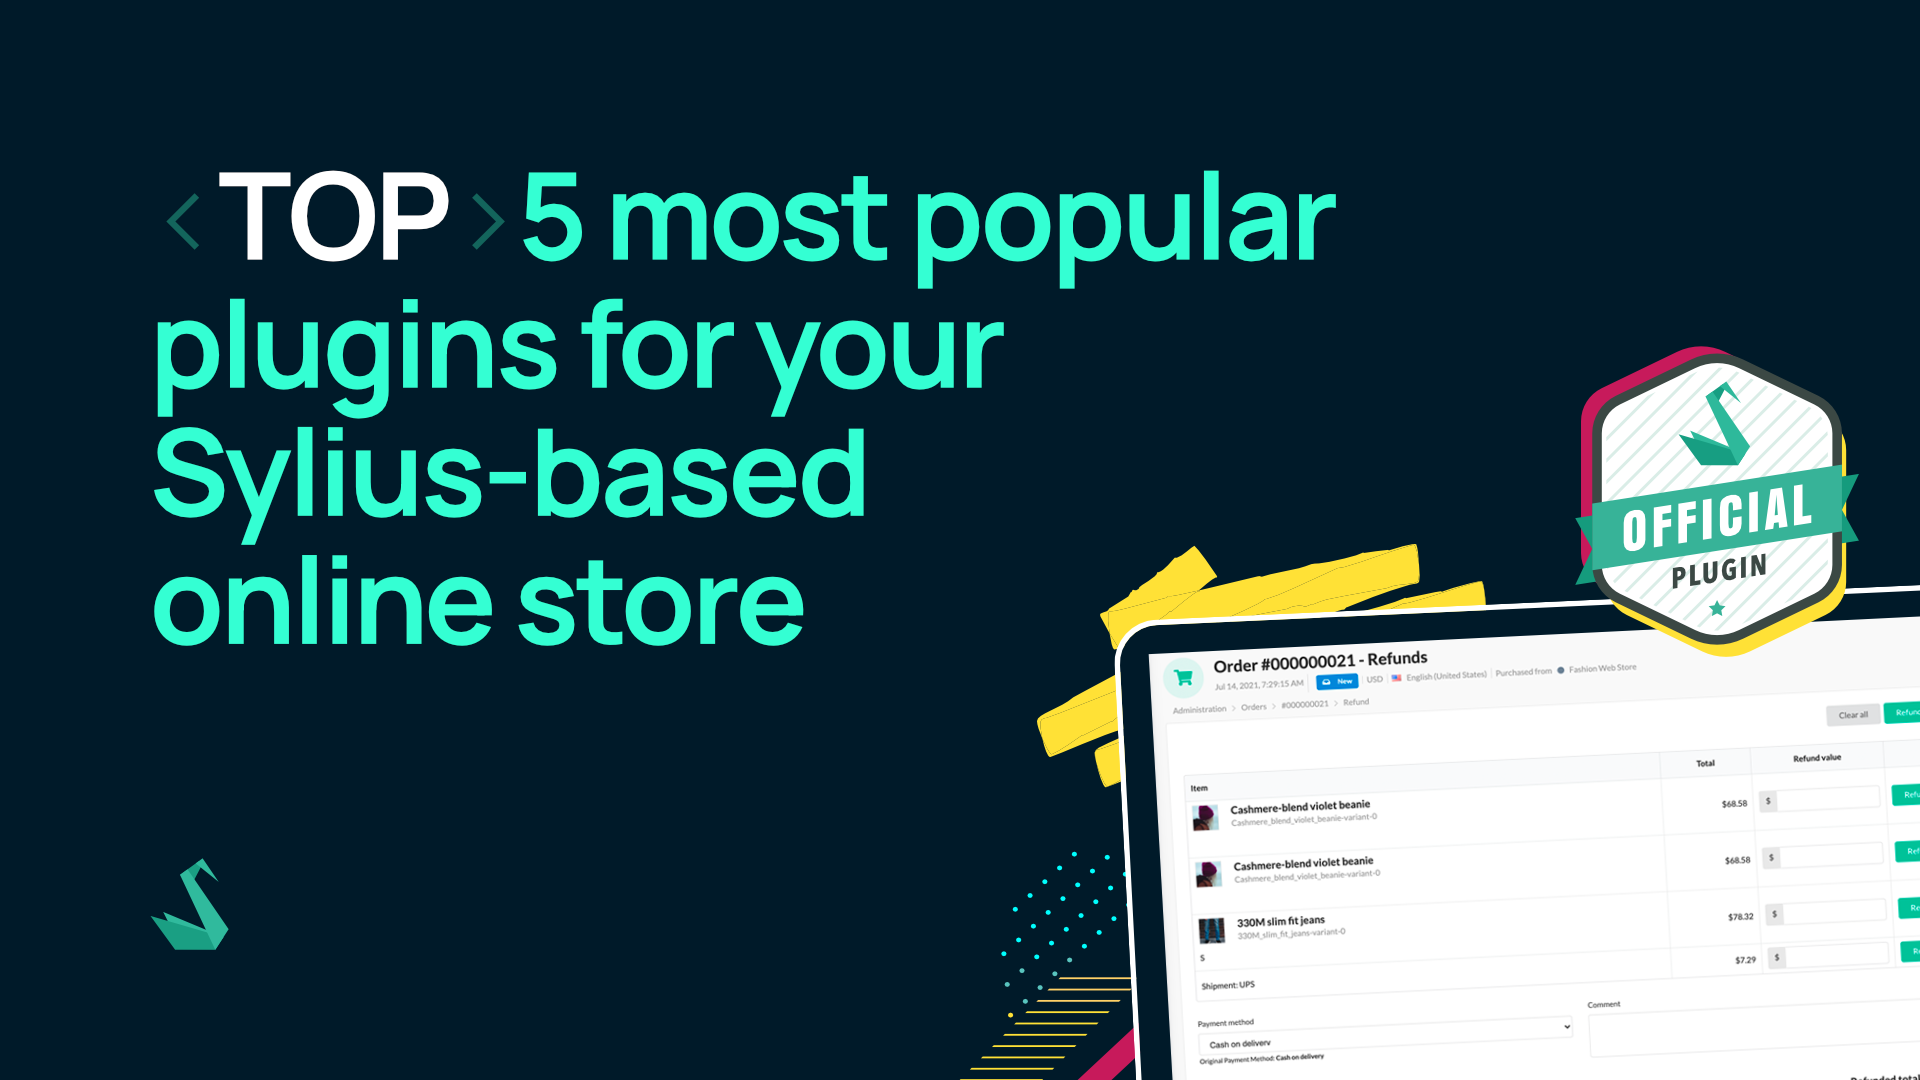 TOP 5 most popular Sylius plugins for your ecommerce